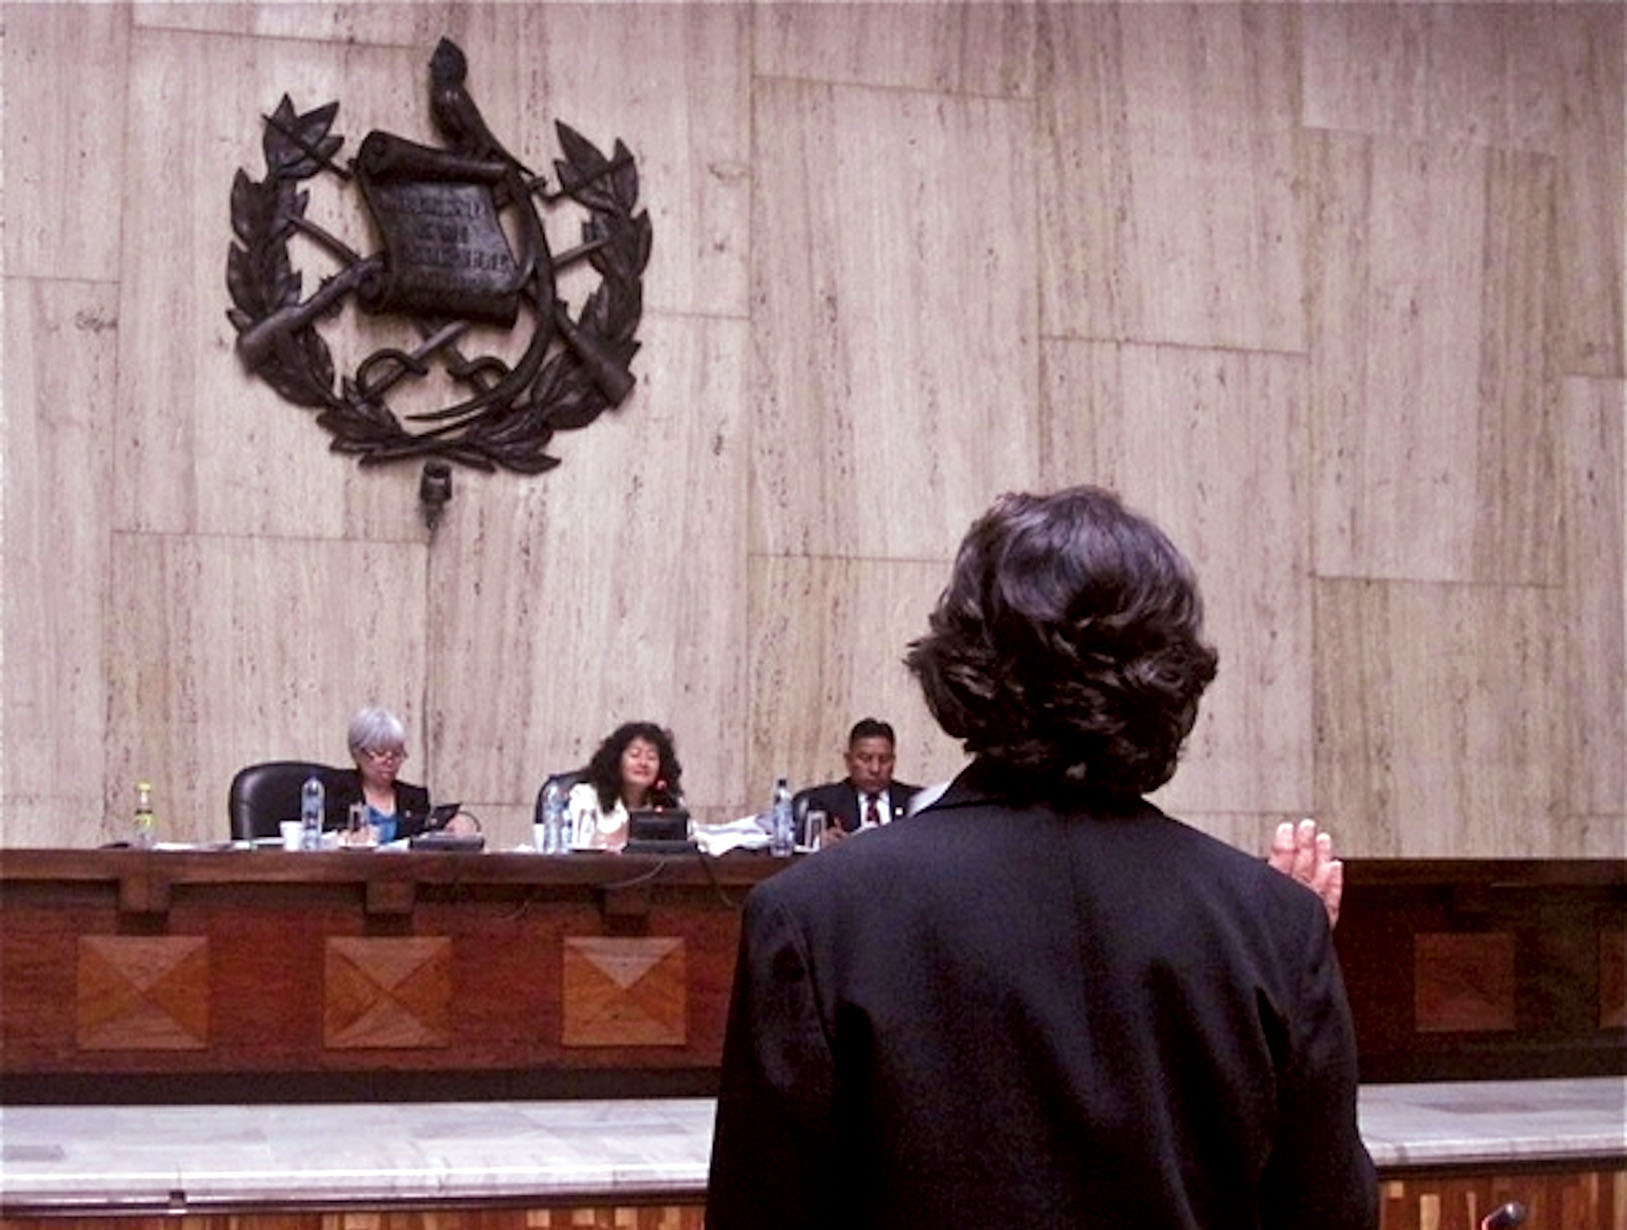 Beatriz Manz being sworn in a Guatemalan courtroom before her testimony. (Photo by Mary Jo McConahay.)